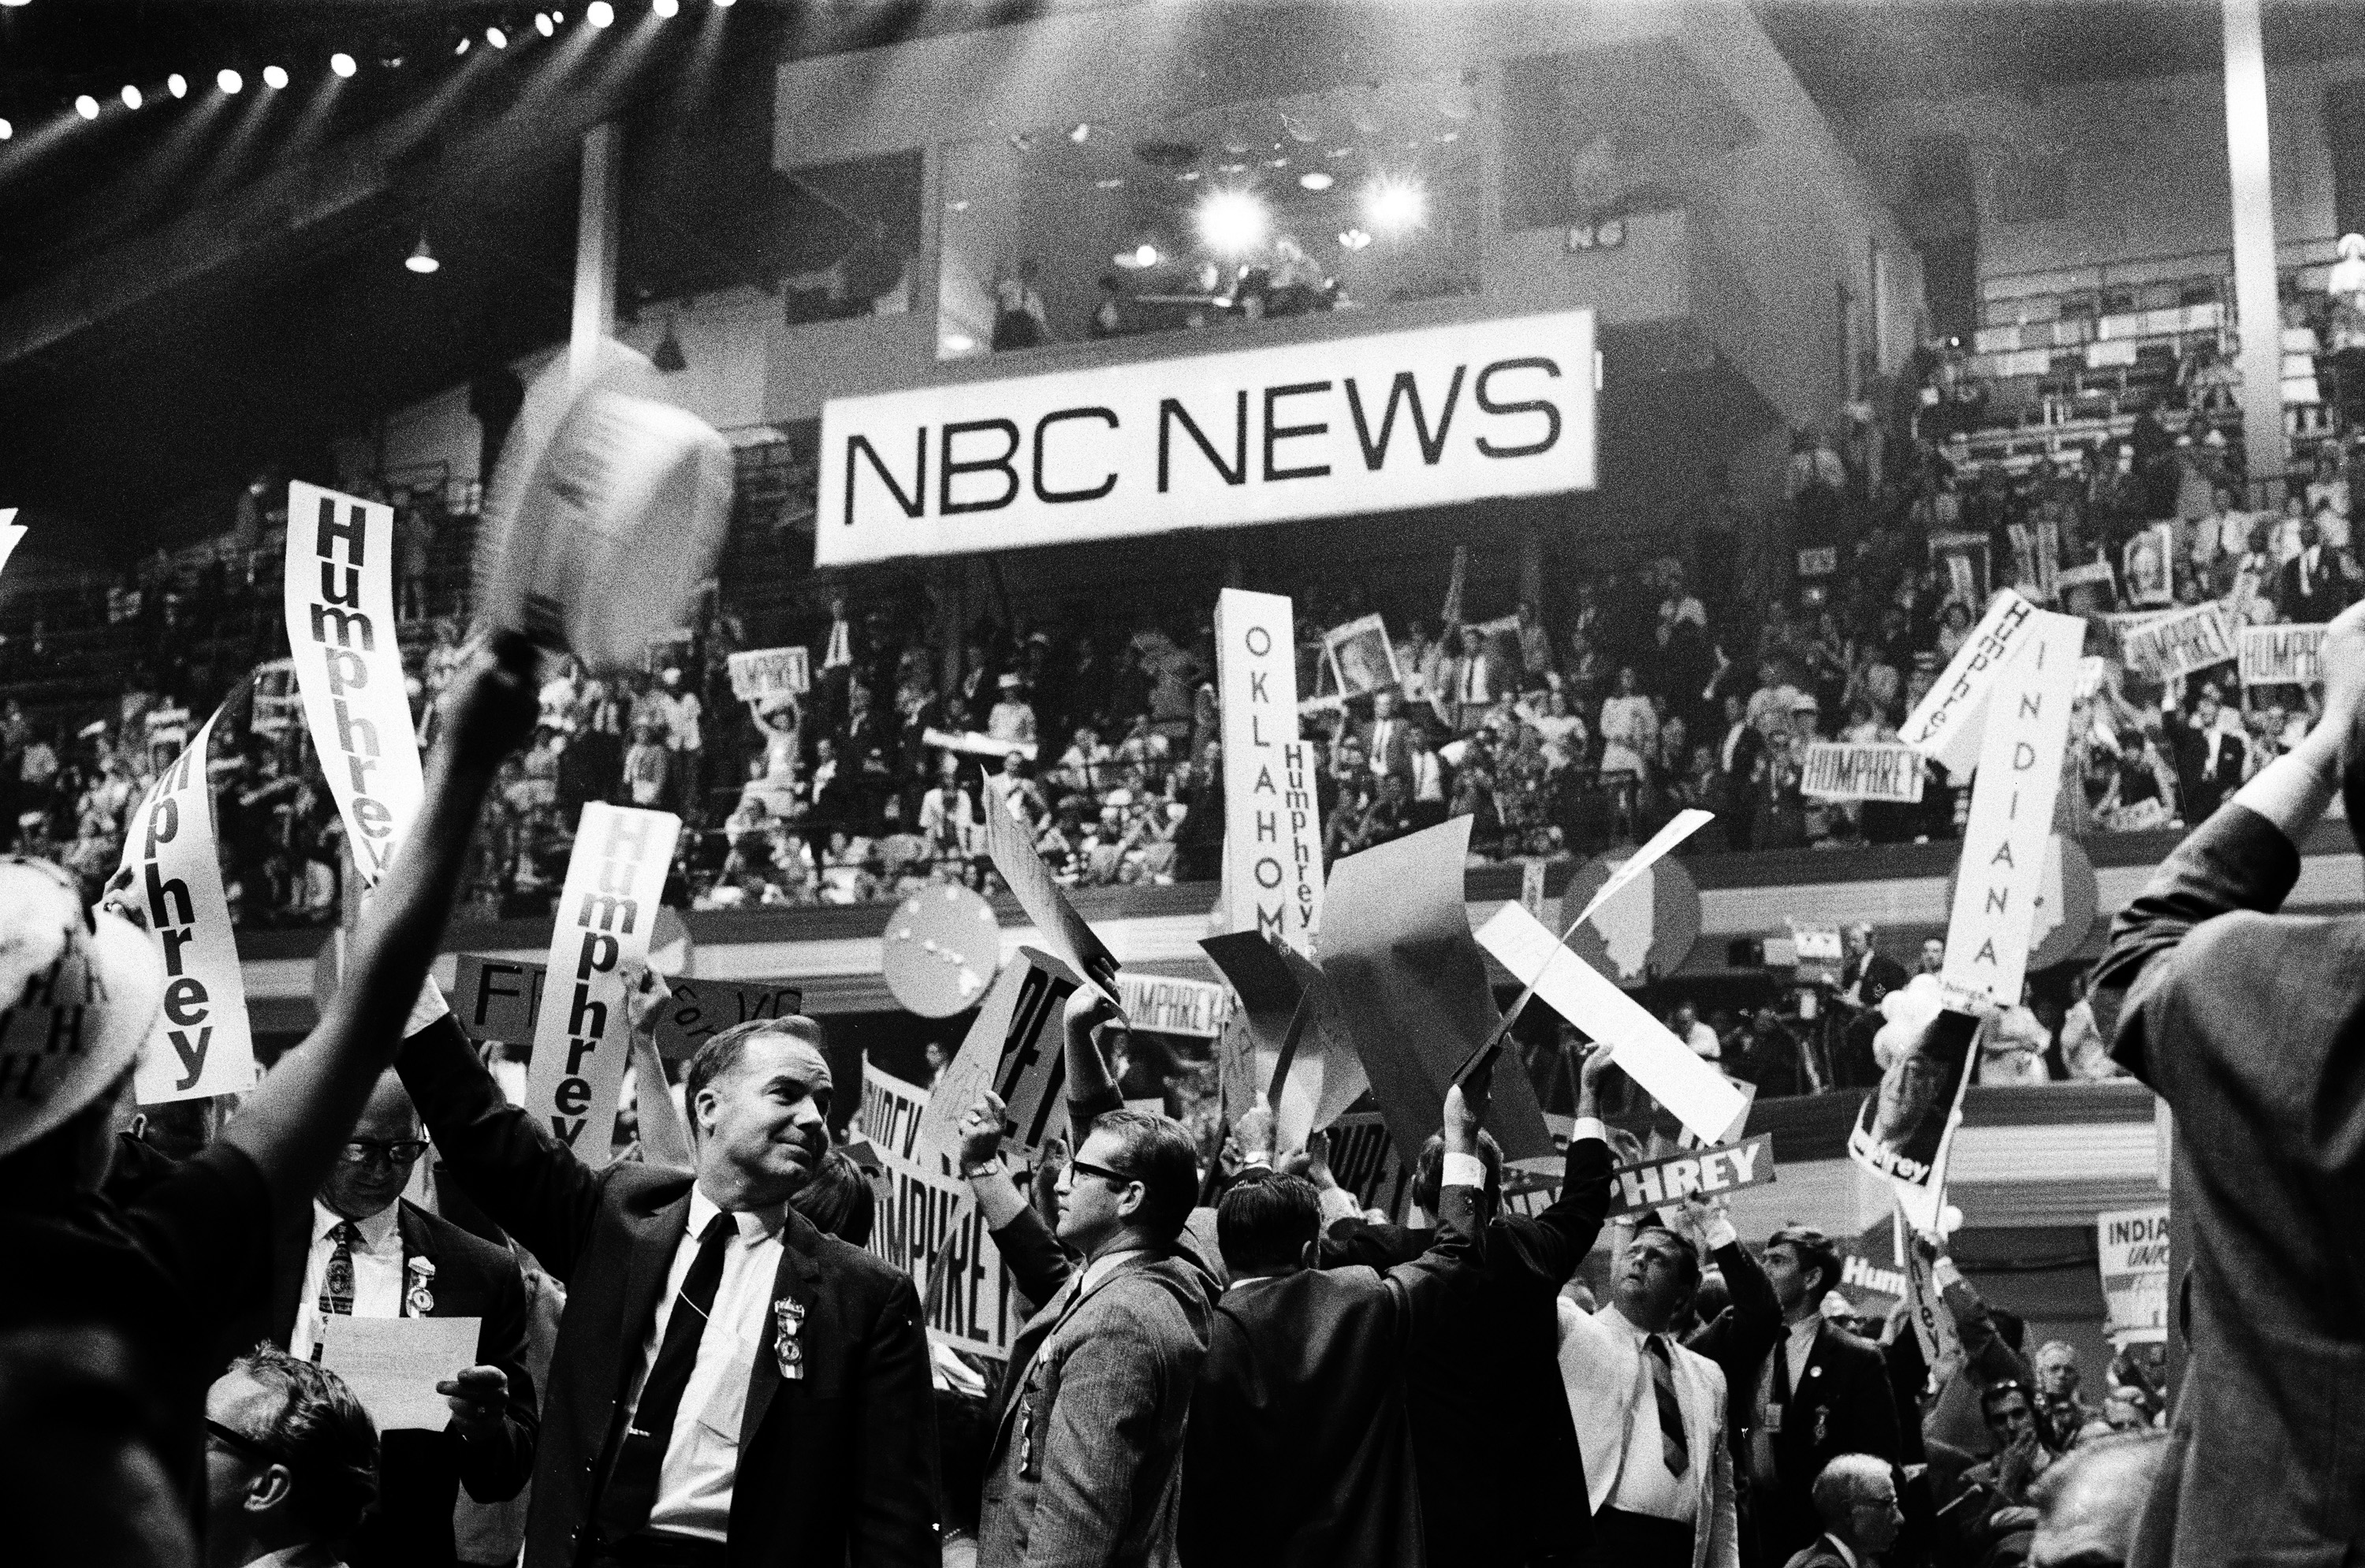 Supporters during the 1968 Democratic National Convention held at the International Amphitheatre in Chicago, Illinois from Aug. 26 to Aug. 29, 1968. (NBC NewsWire/Getty Images)